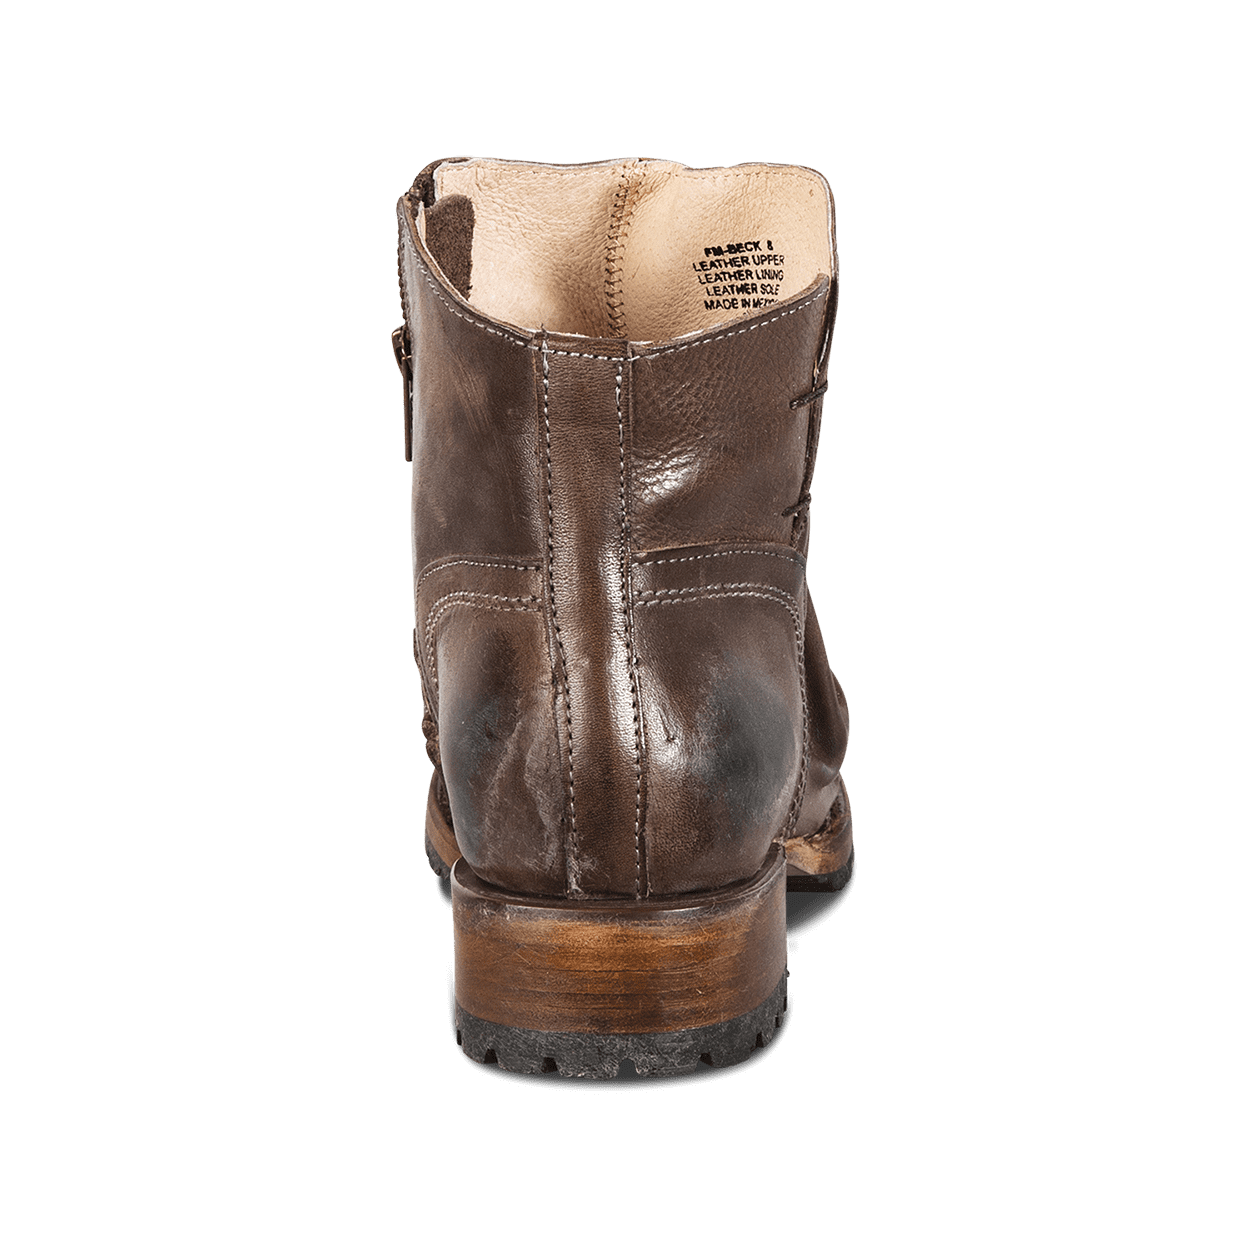 Back view showing low heel on FREEBIRD men's Beck stone ankle boot